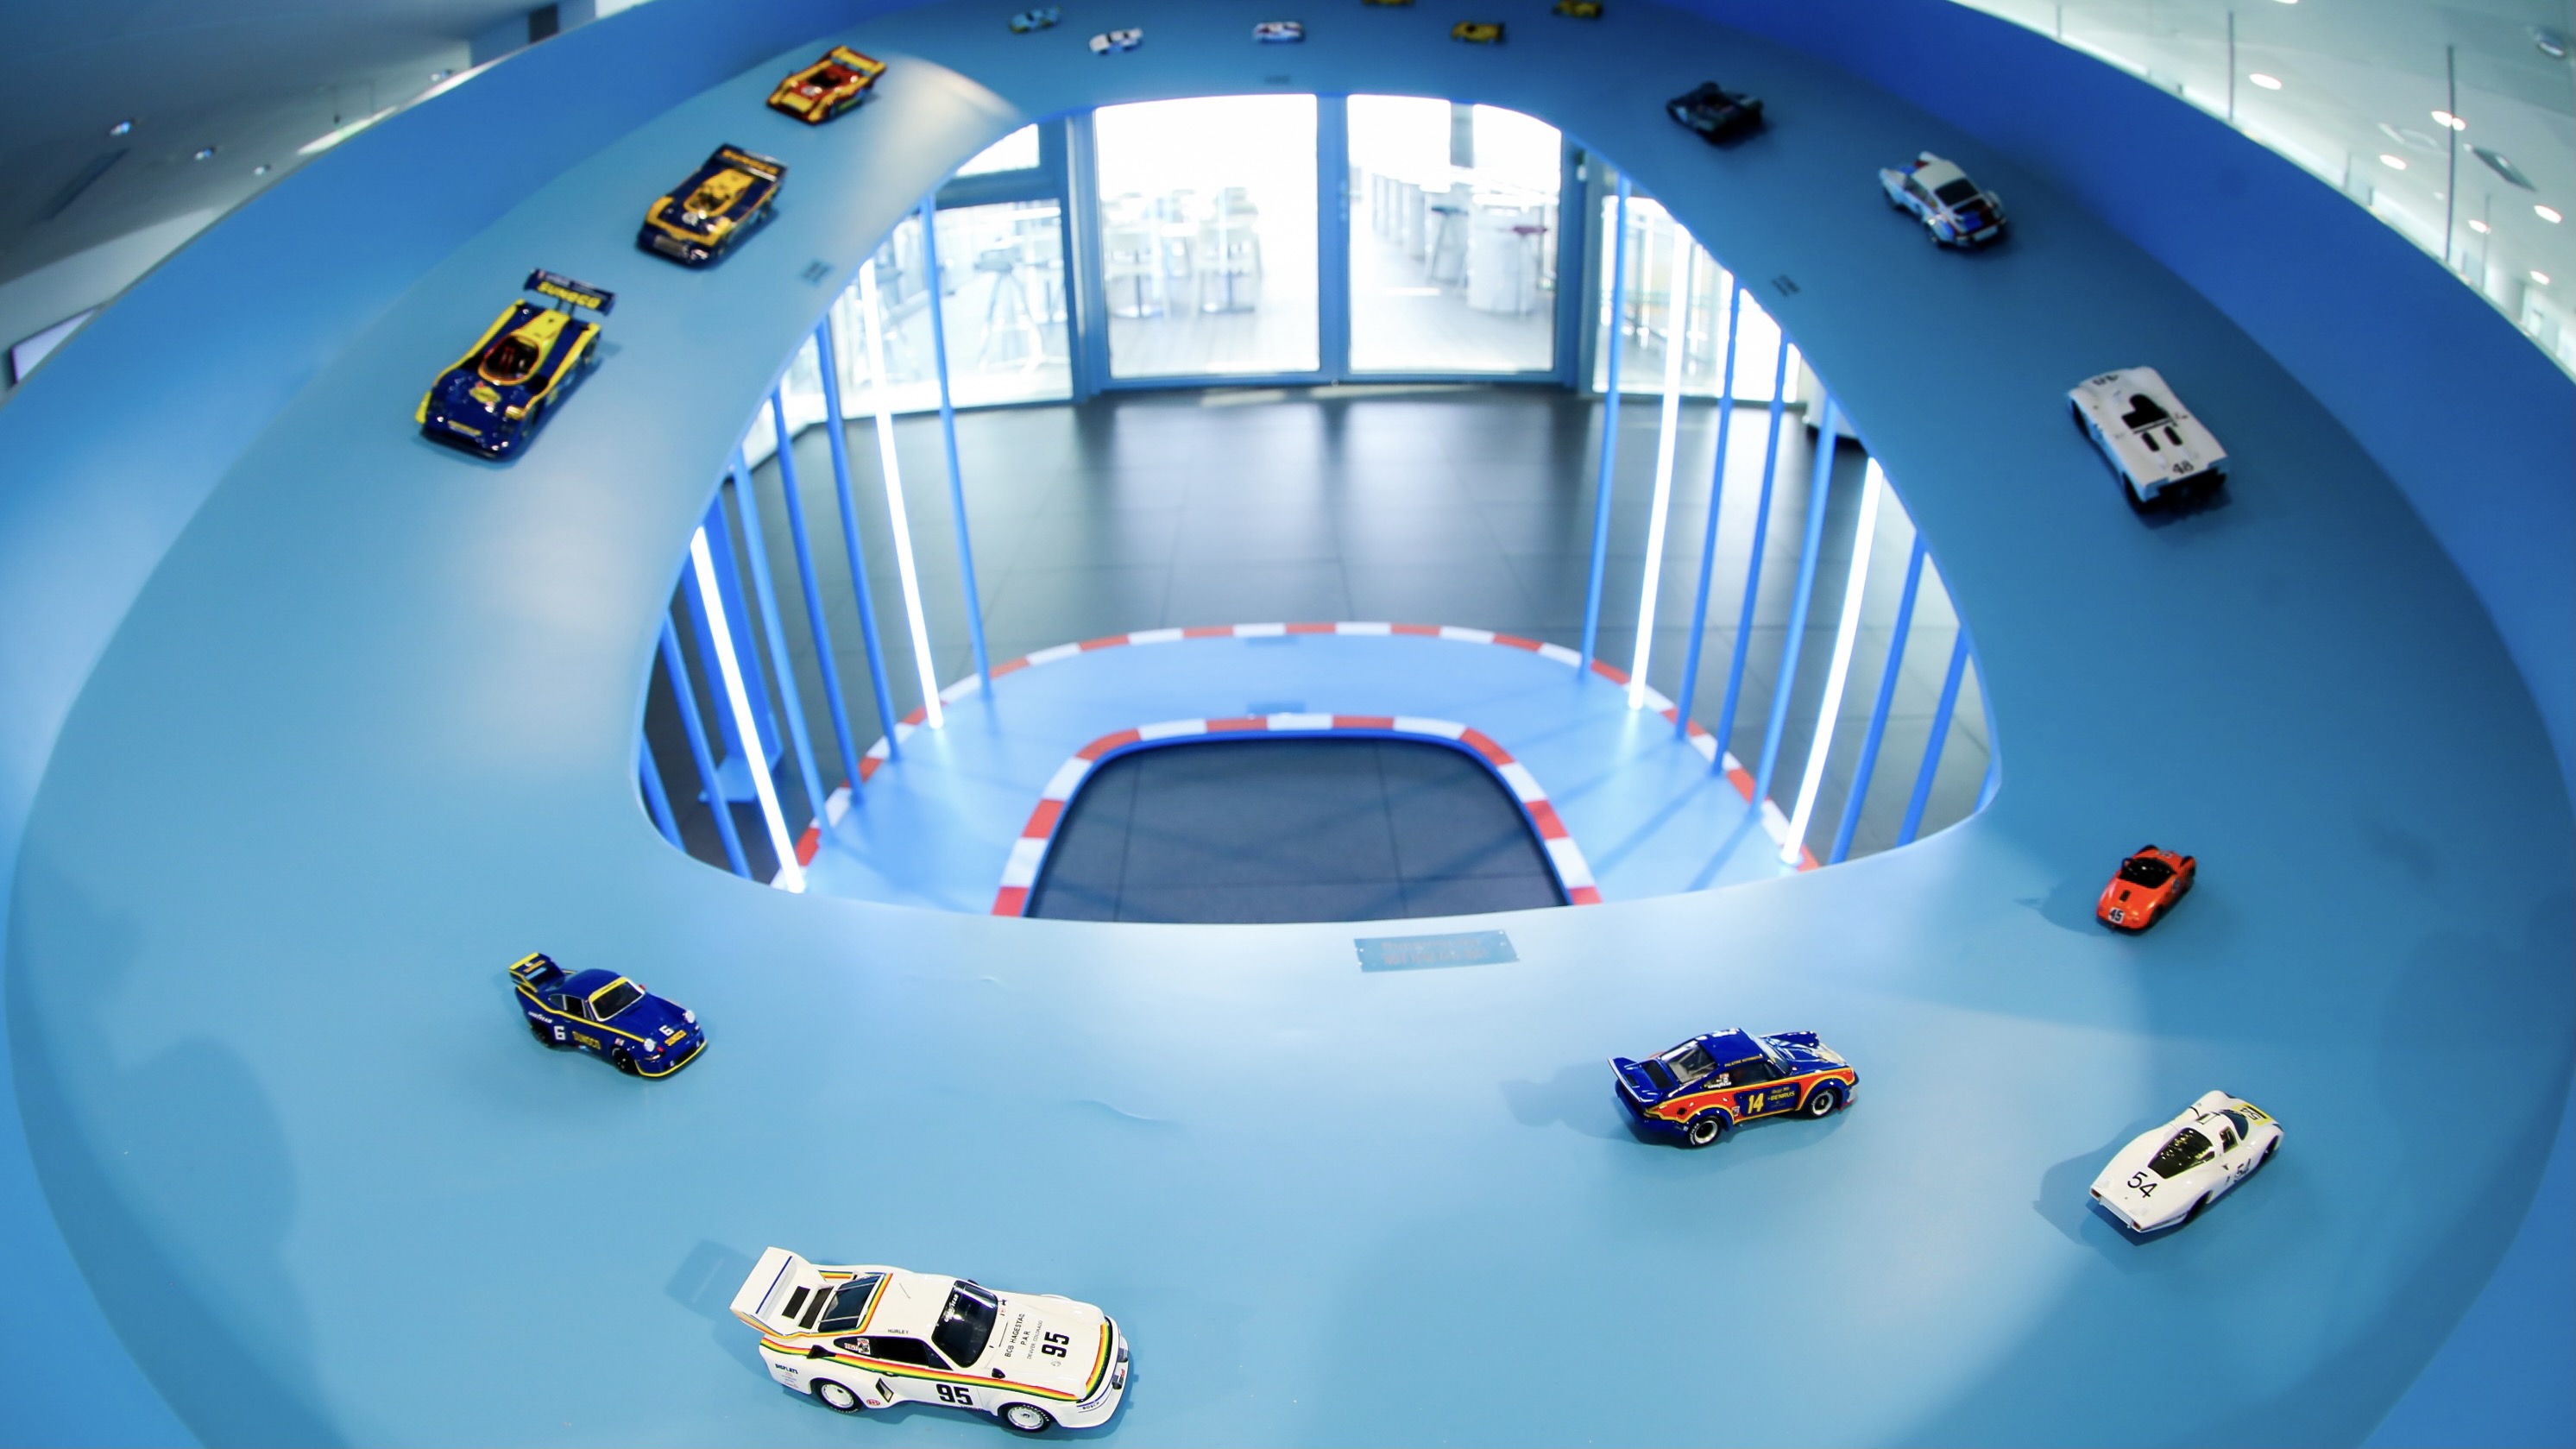 Display of model race cars circling a blue track